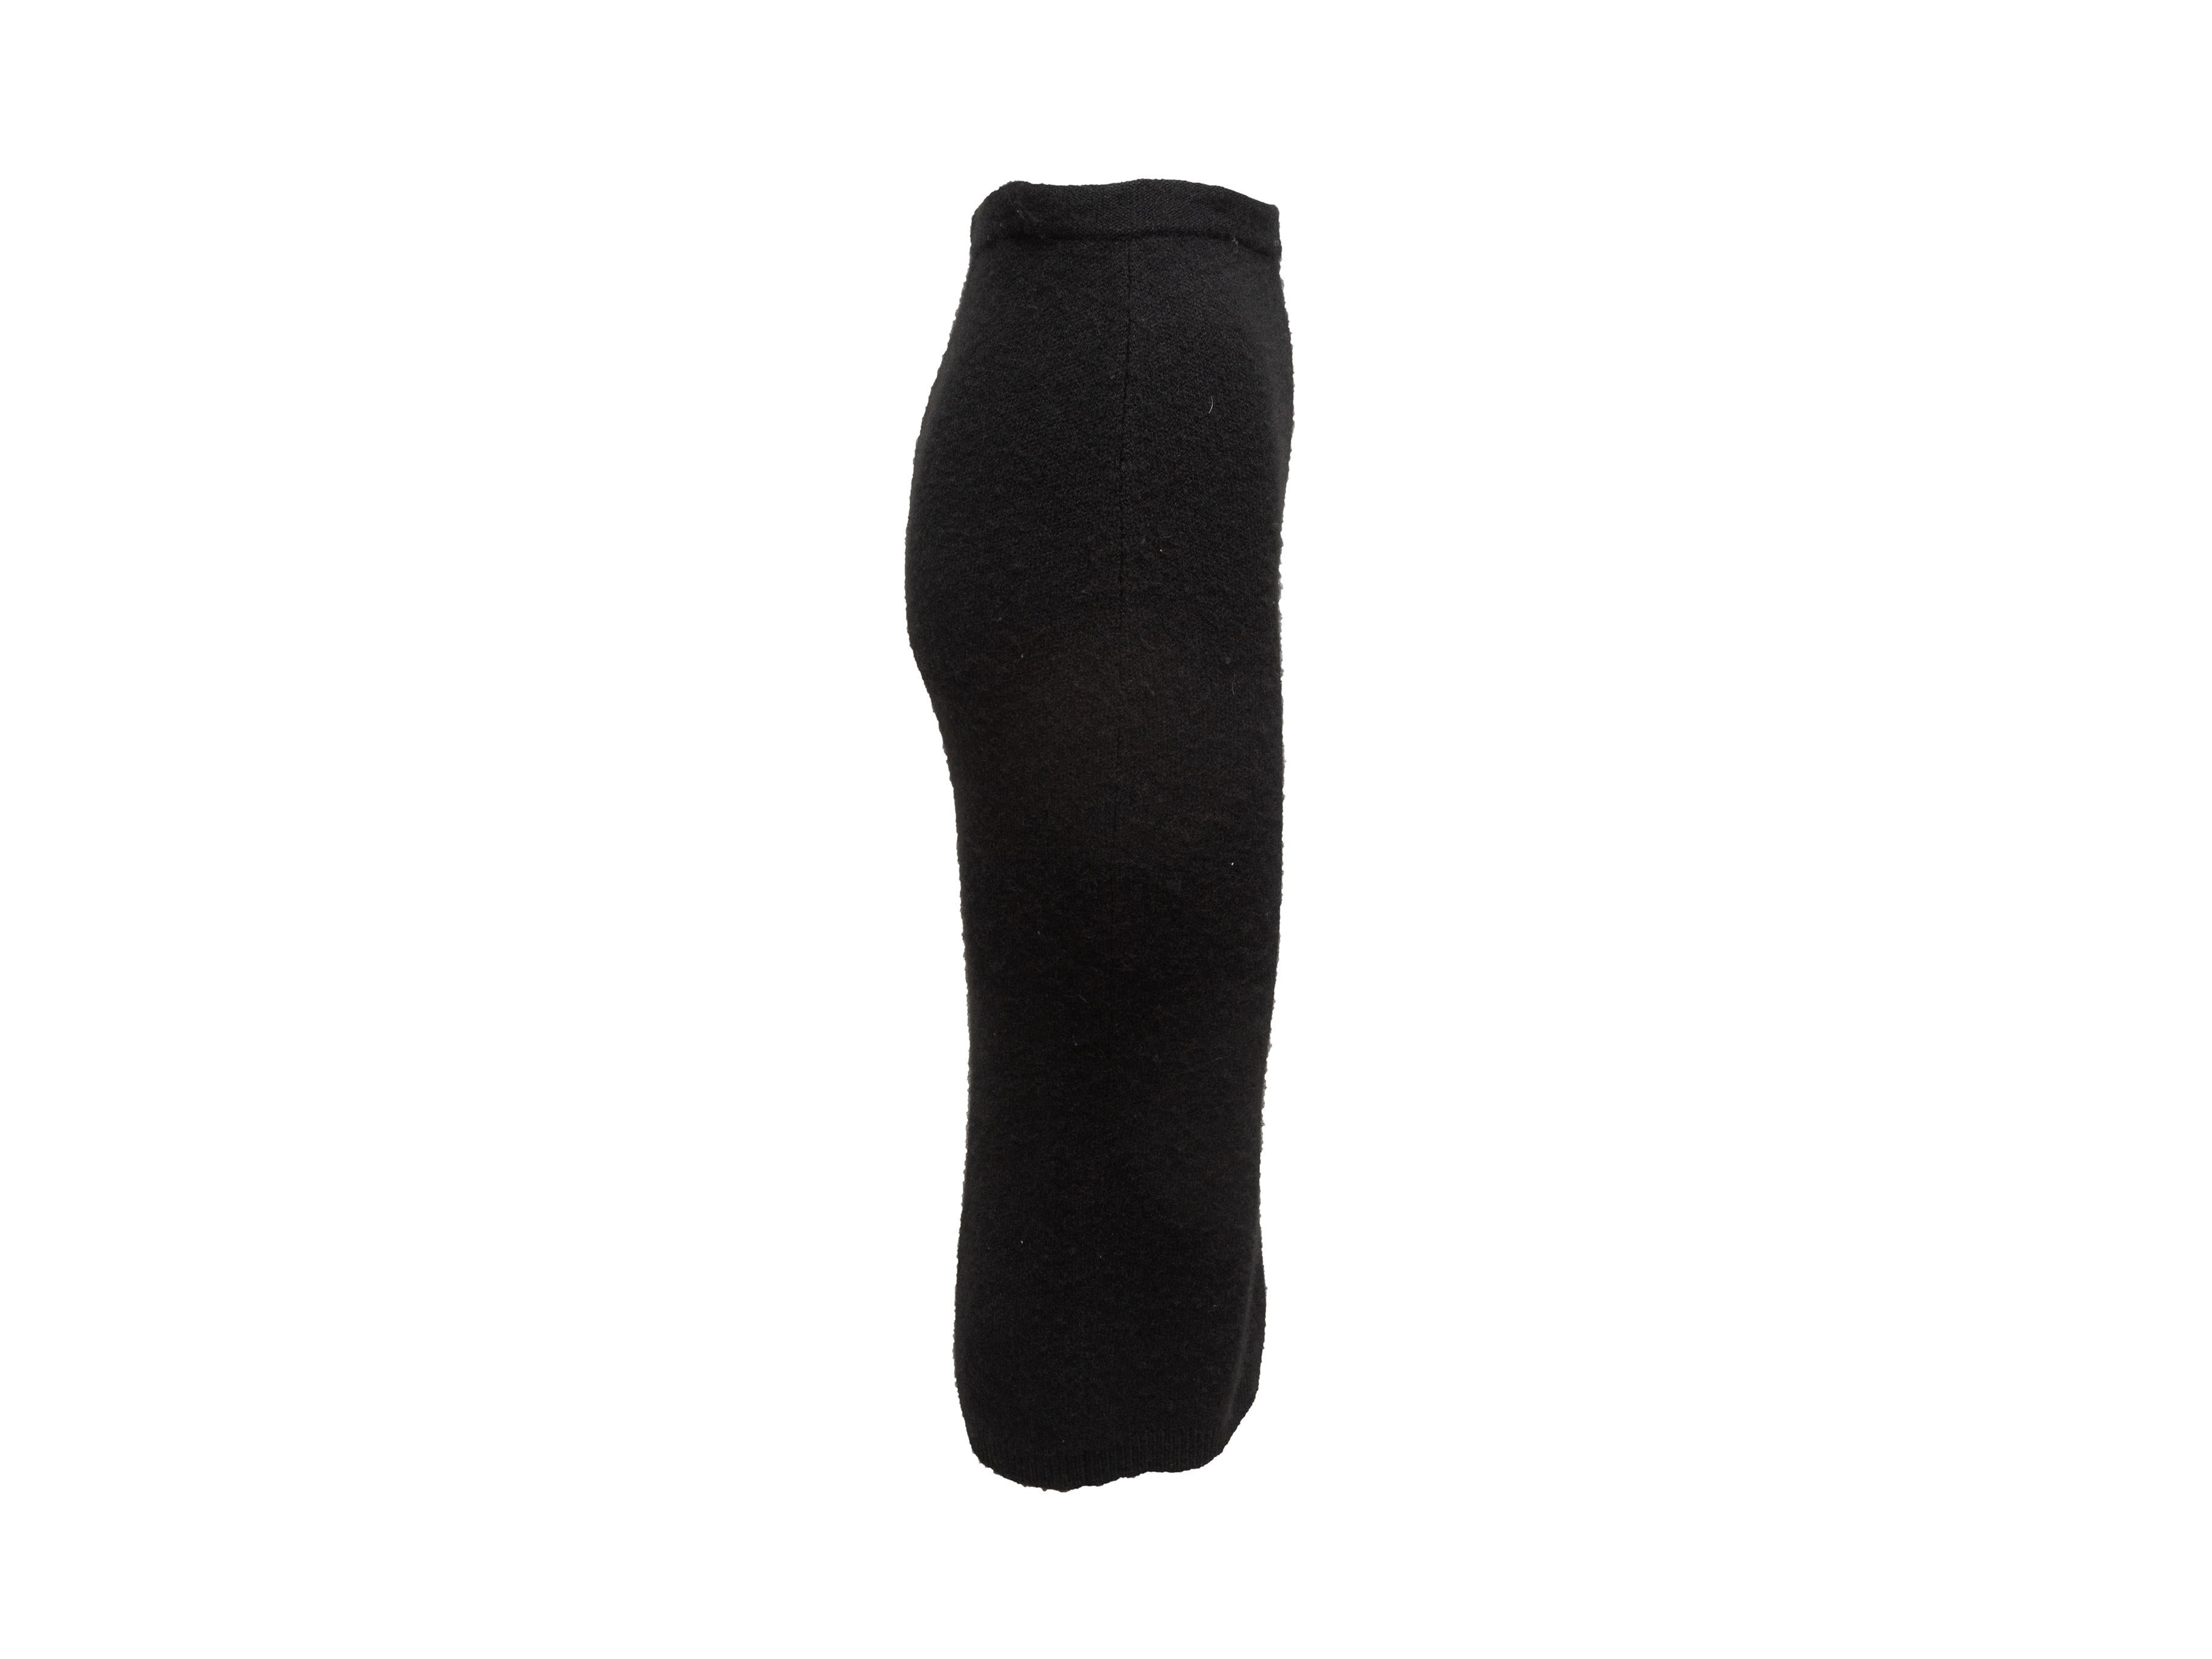 Product details: Black cashmere knit midi skirt by Tom Ford. 25